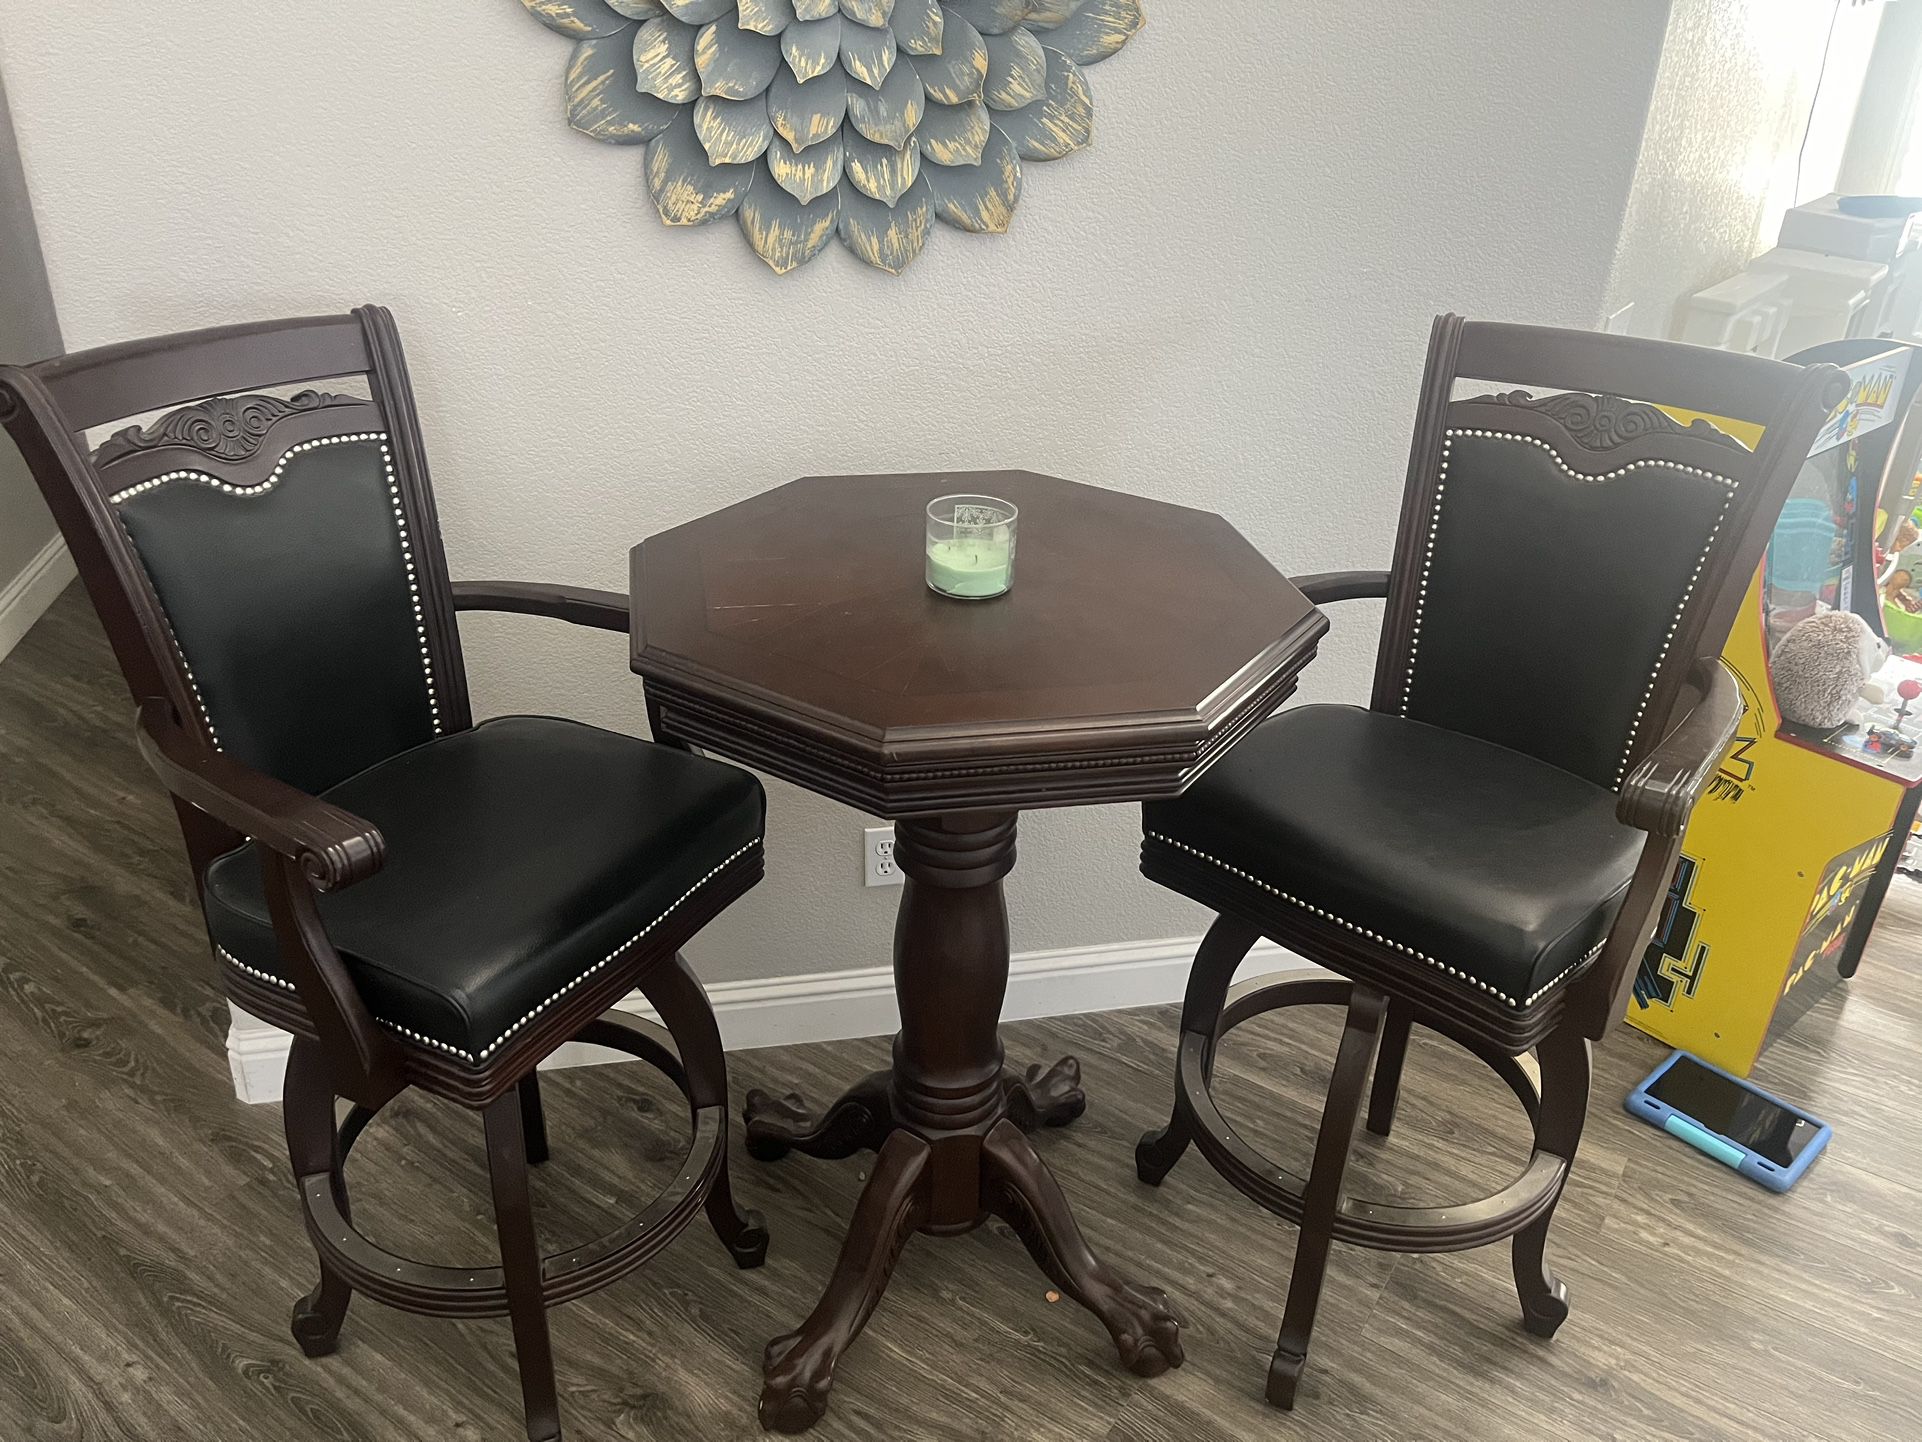 American Heritage table and chairs 